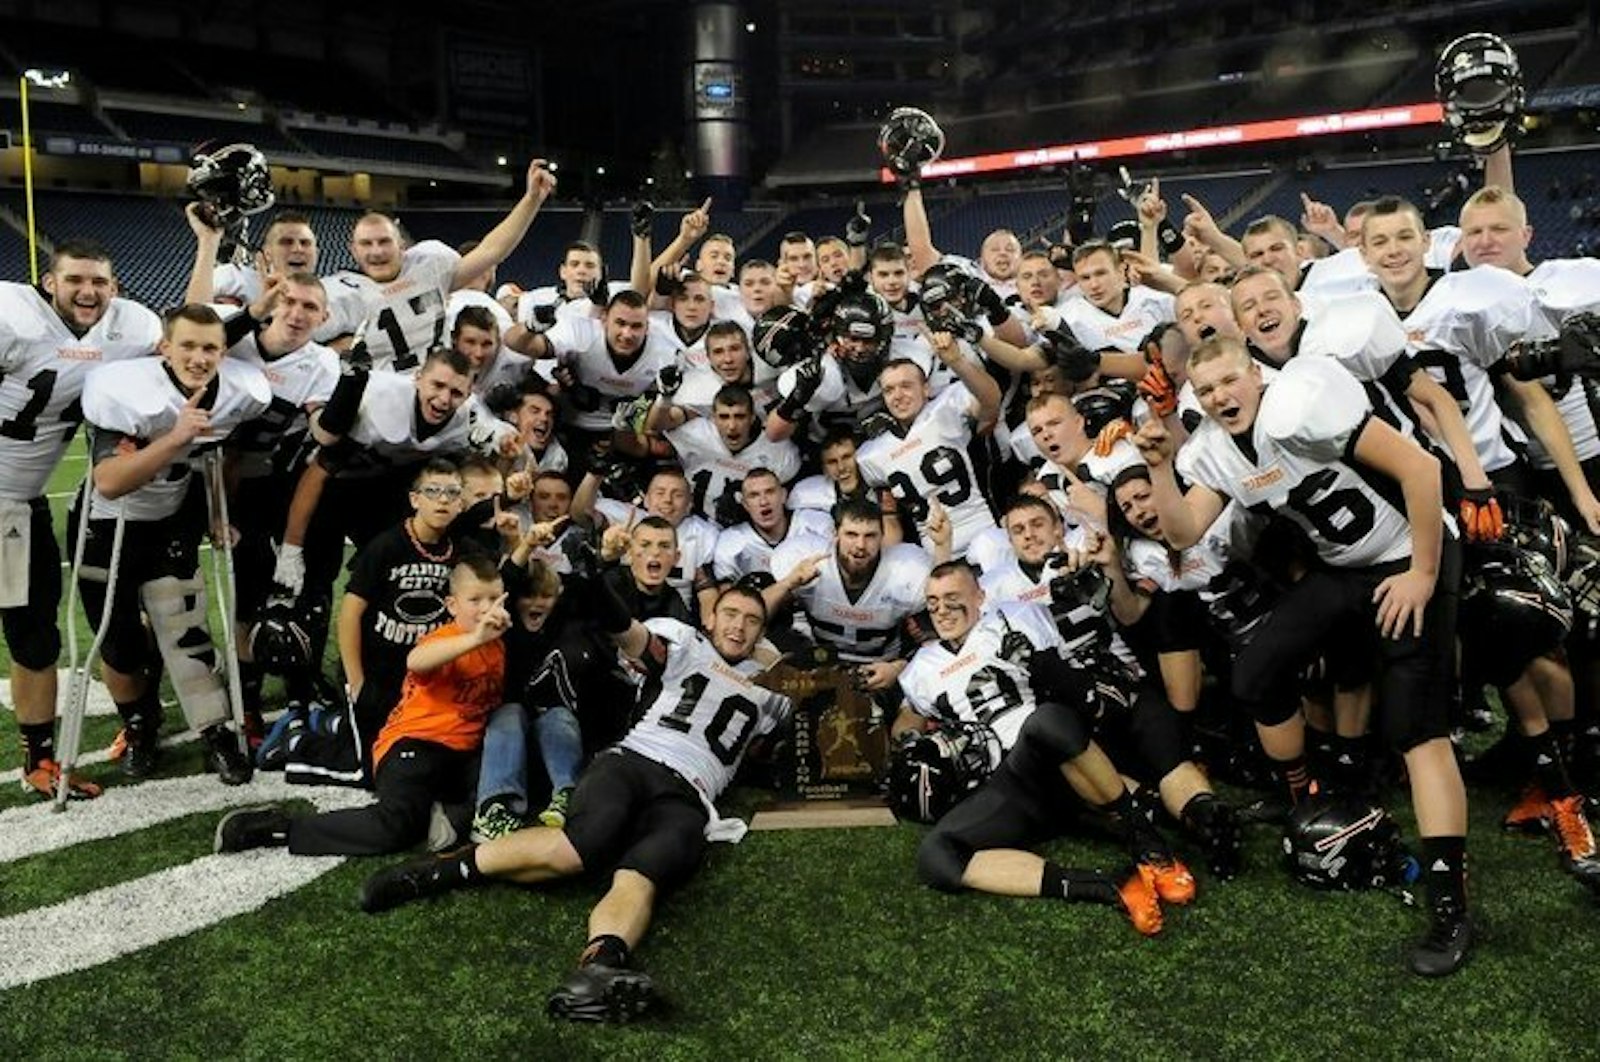 Under Ron Glodich’s guidance, Marine City High School won the MHSAA Division 4 state football championship in 2013, defeating Grand Rapids South Christian, 49-35. (Photo from ronglodich.com)